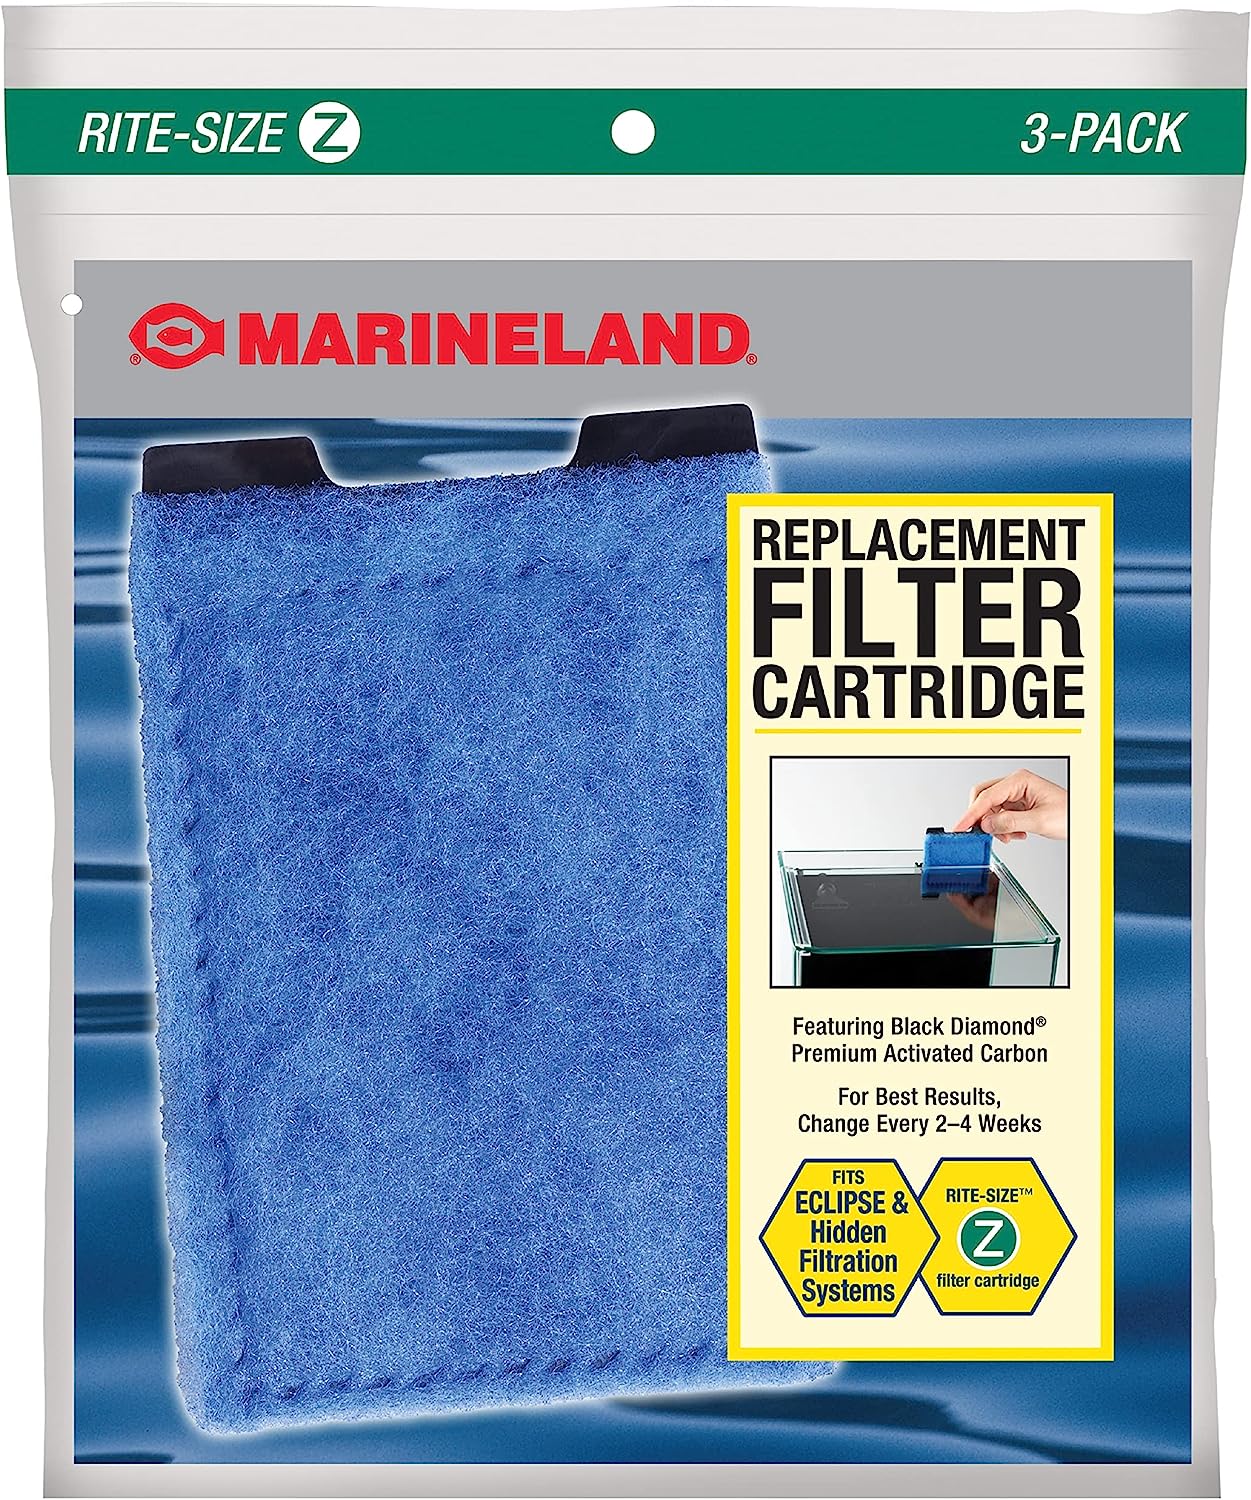 Marineland Rite-Size Z Filter Replacement Cartridges - 3 count